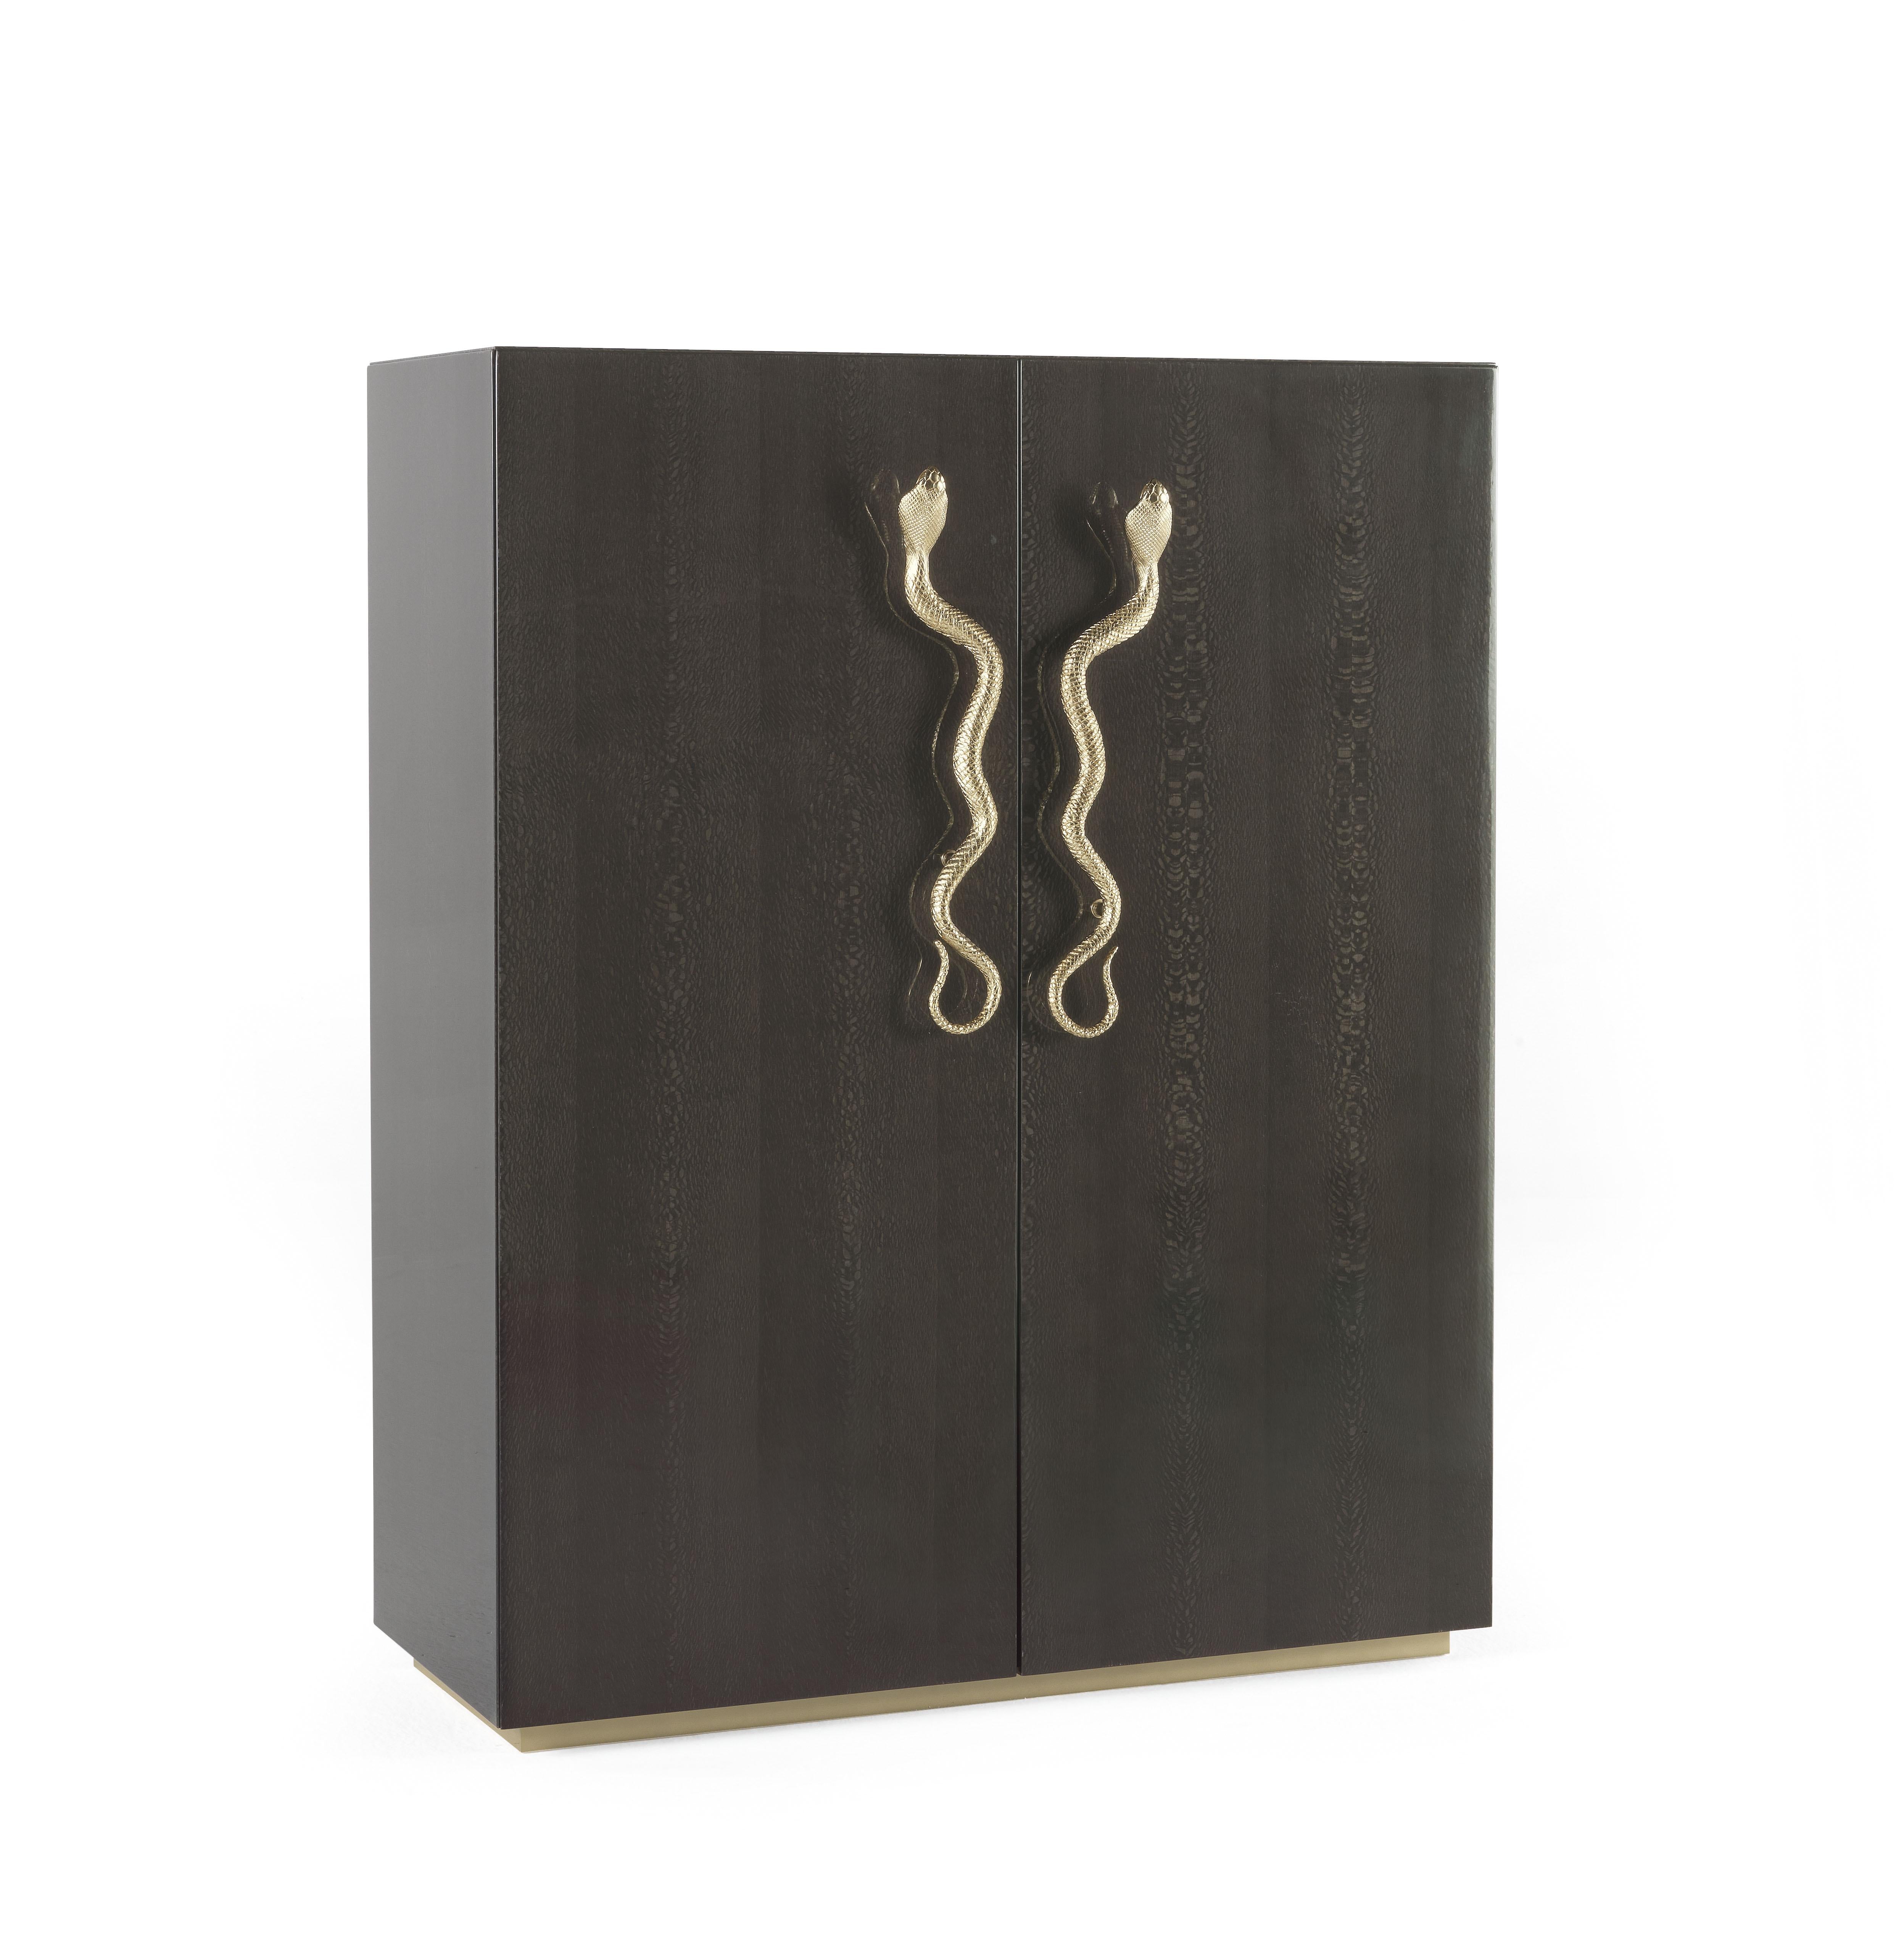 Azingo Bar cabinet with structure in multi-layer wood. Finishing in glossy carbalho grey color. Wooden base lacquered in gold finishing. Inside finishing in microfiber with smoked glass shelves and smoked mirrors. Snake “jewel handle” in cast brass